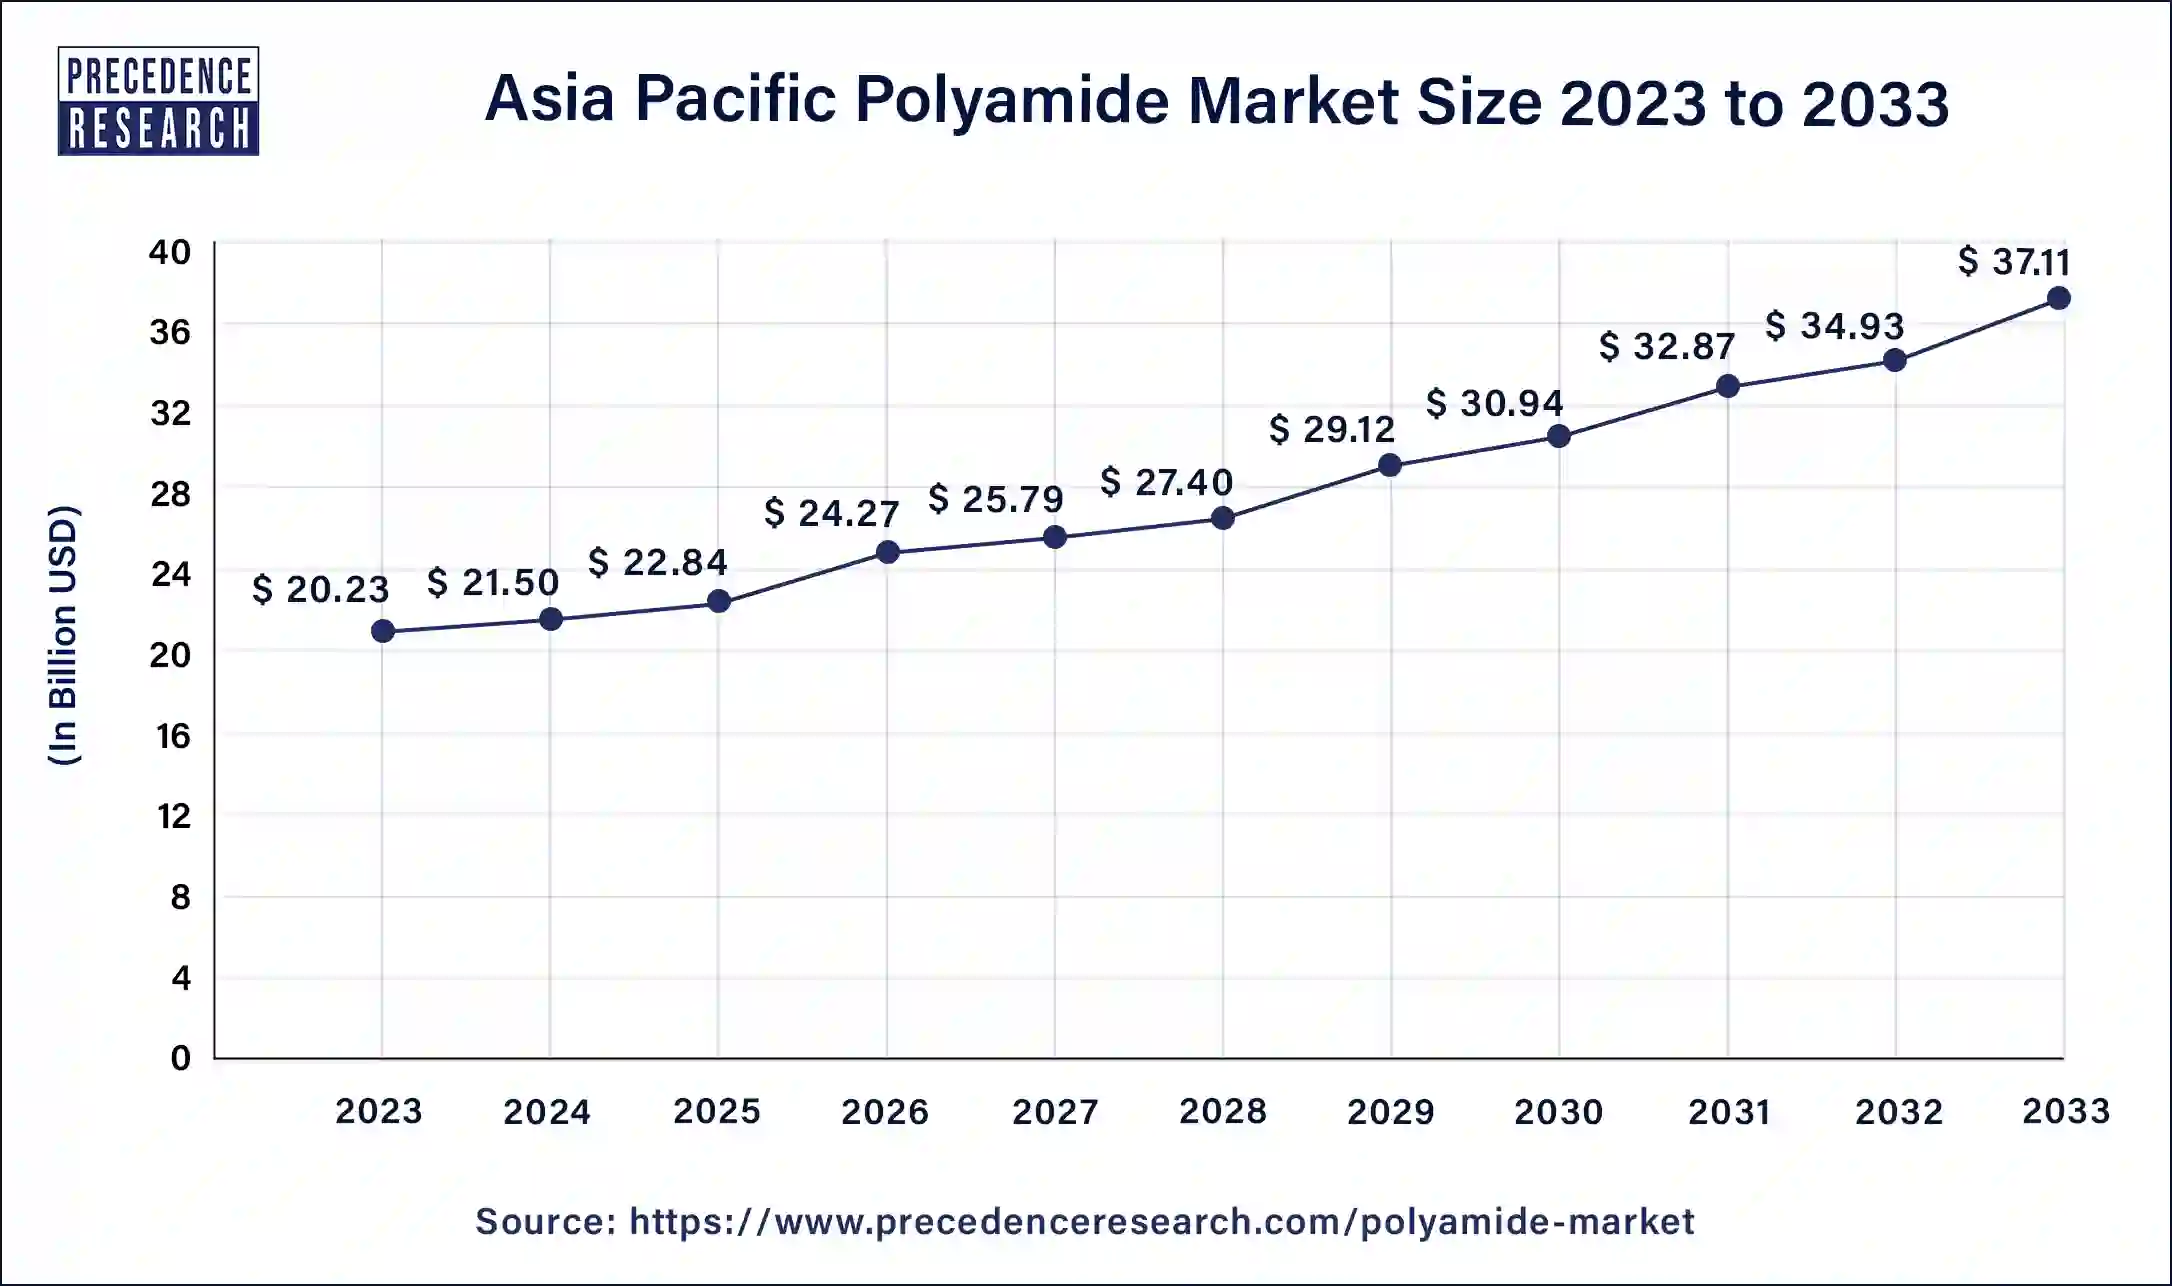 Asia Pacific Polyamide Market Size 2024 to 2033